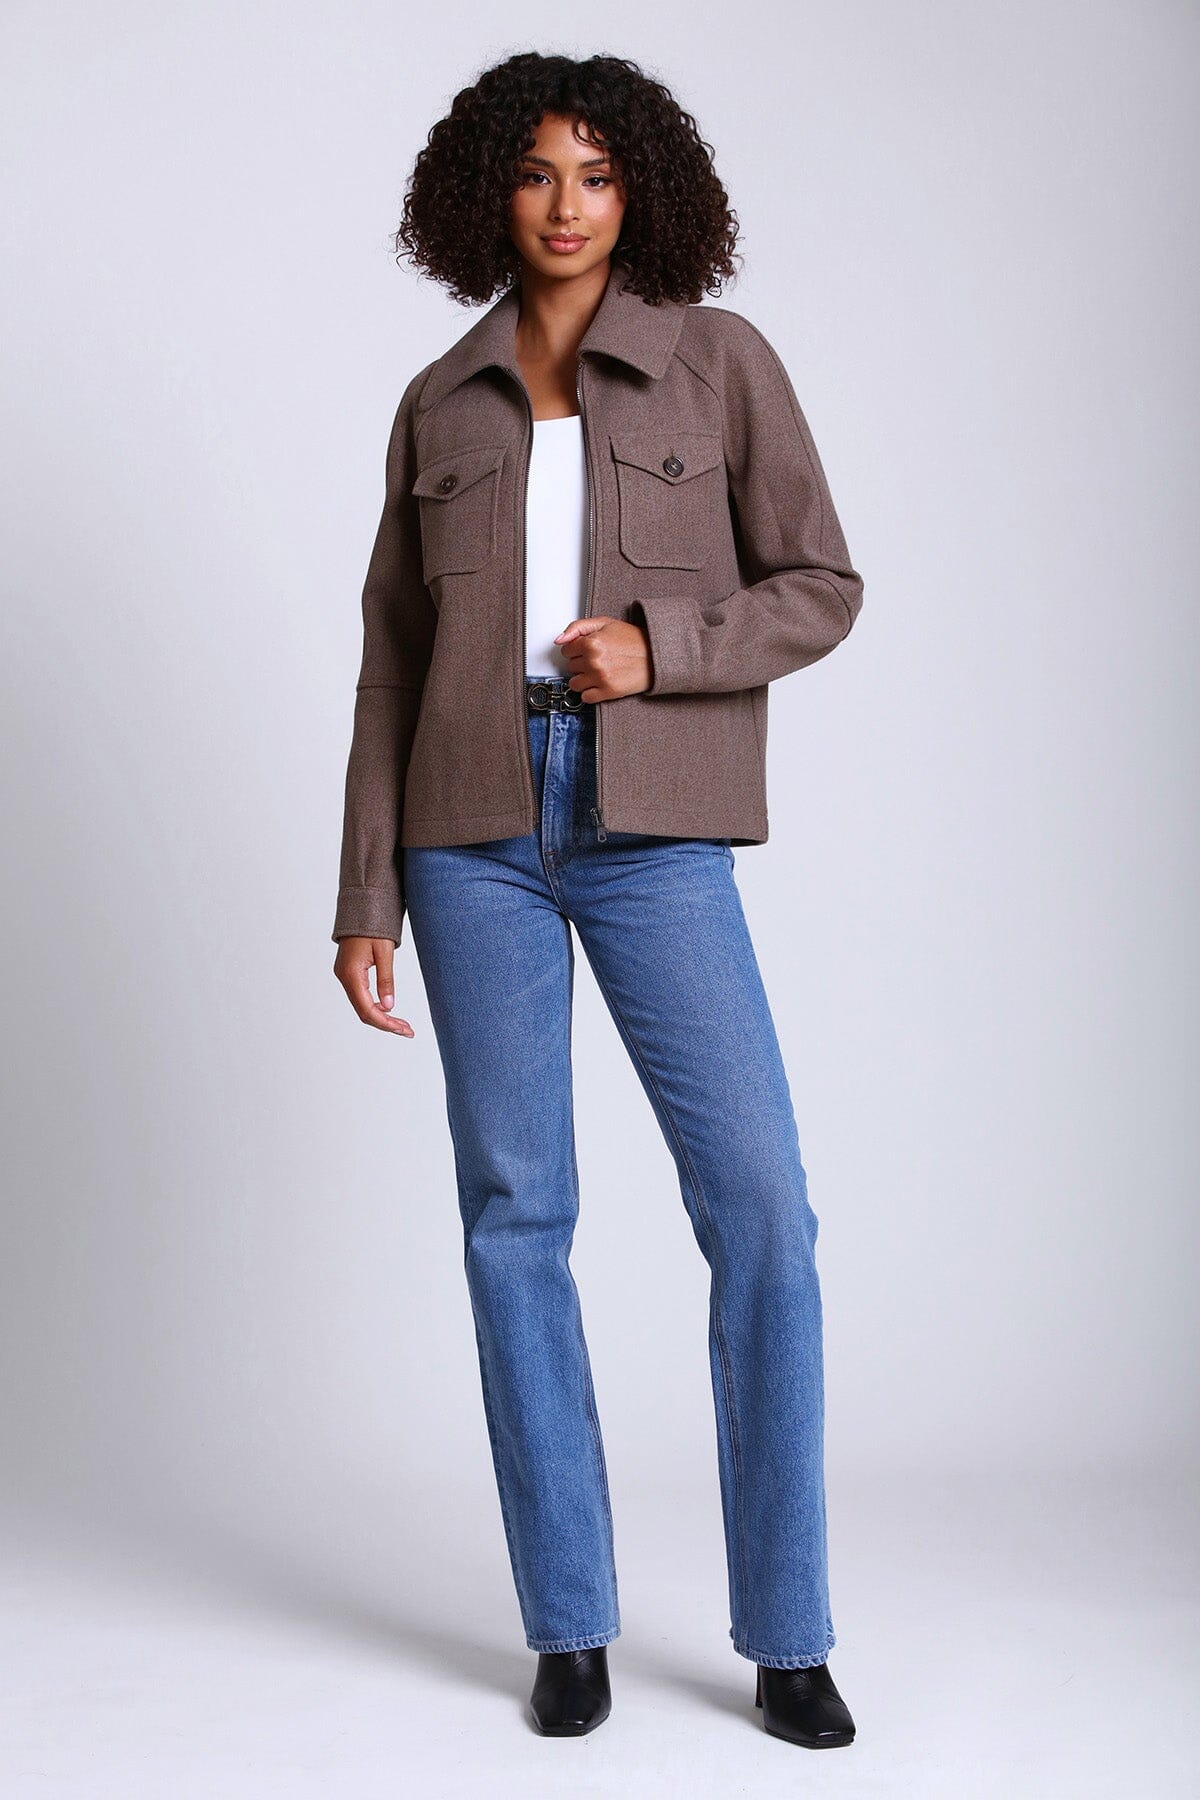 relaxed full zip front jacket shacket mocha brown - figure flattering day to night shackets outerwear for women